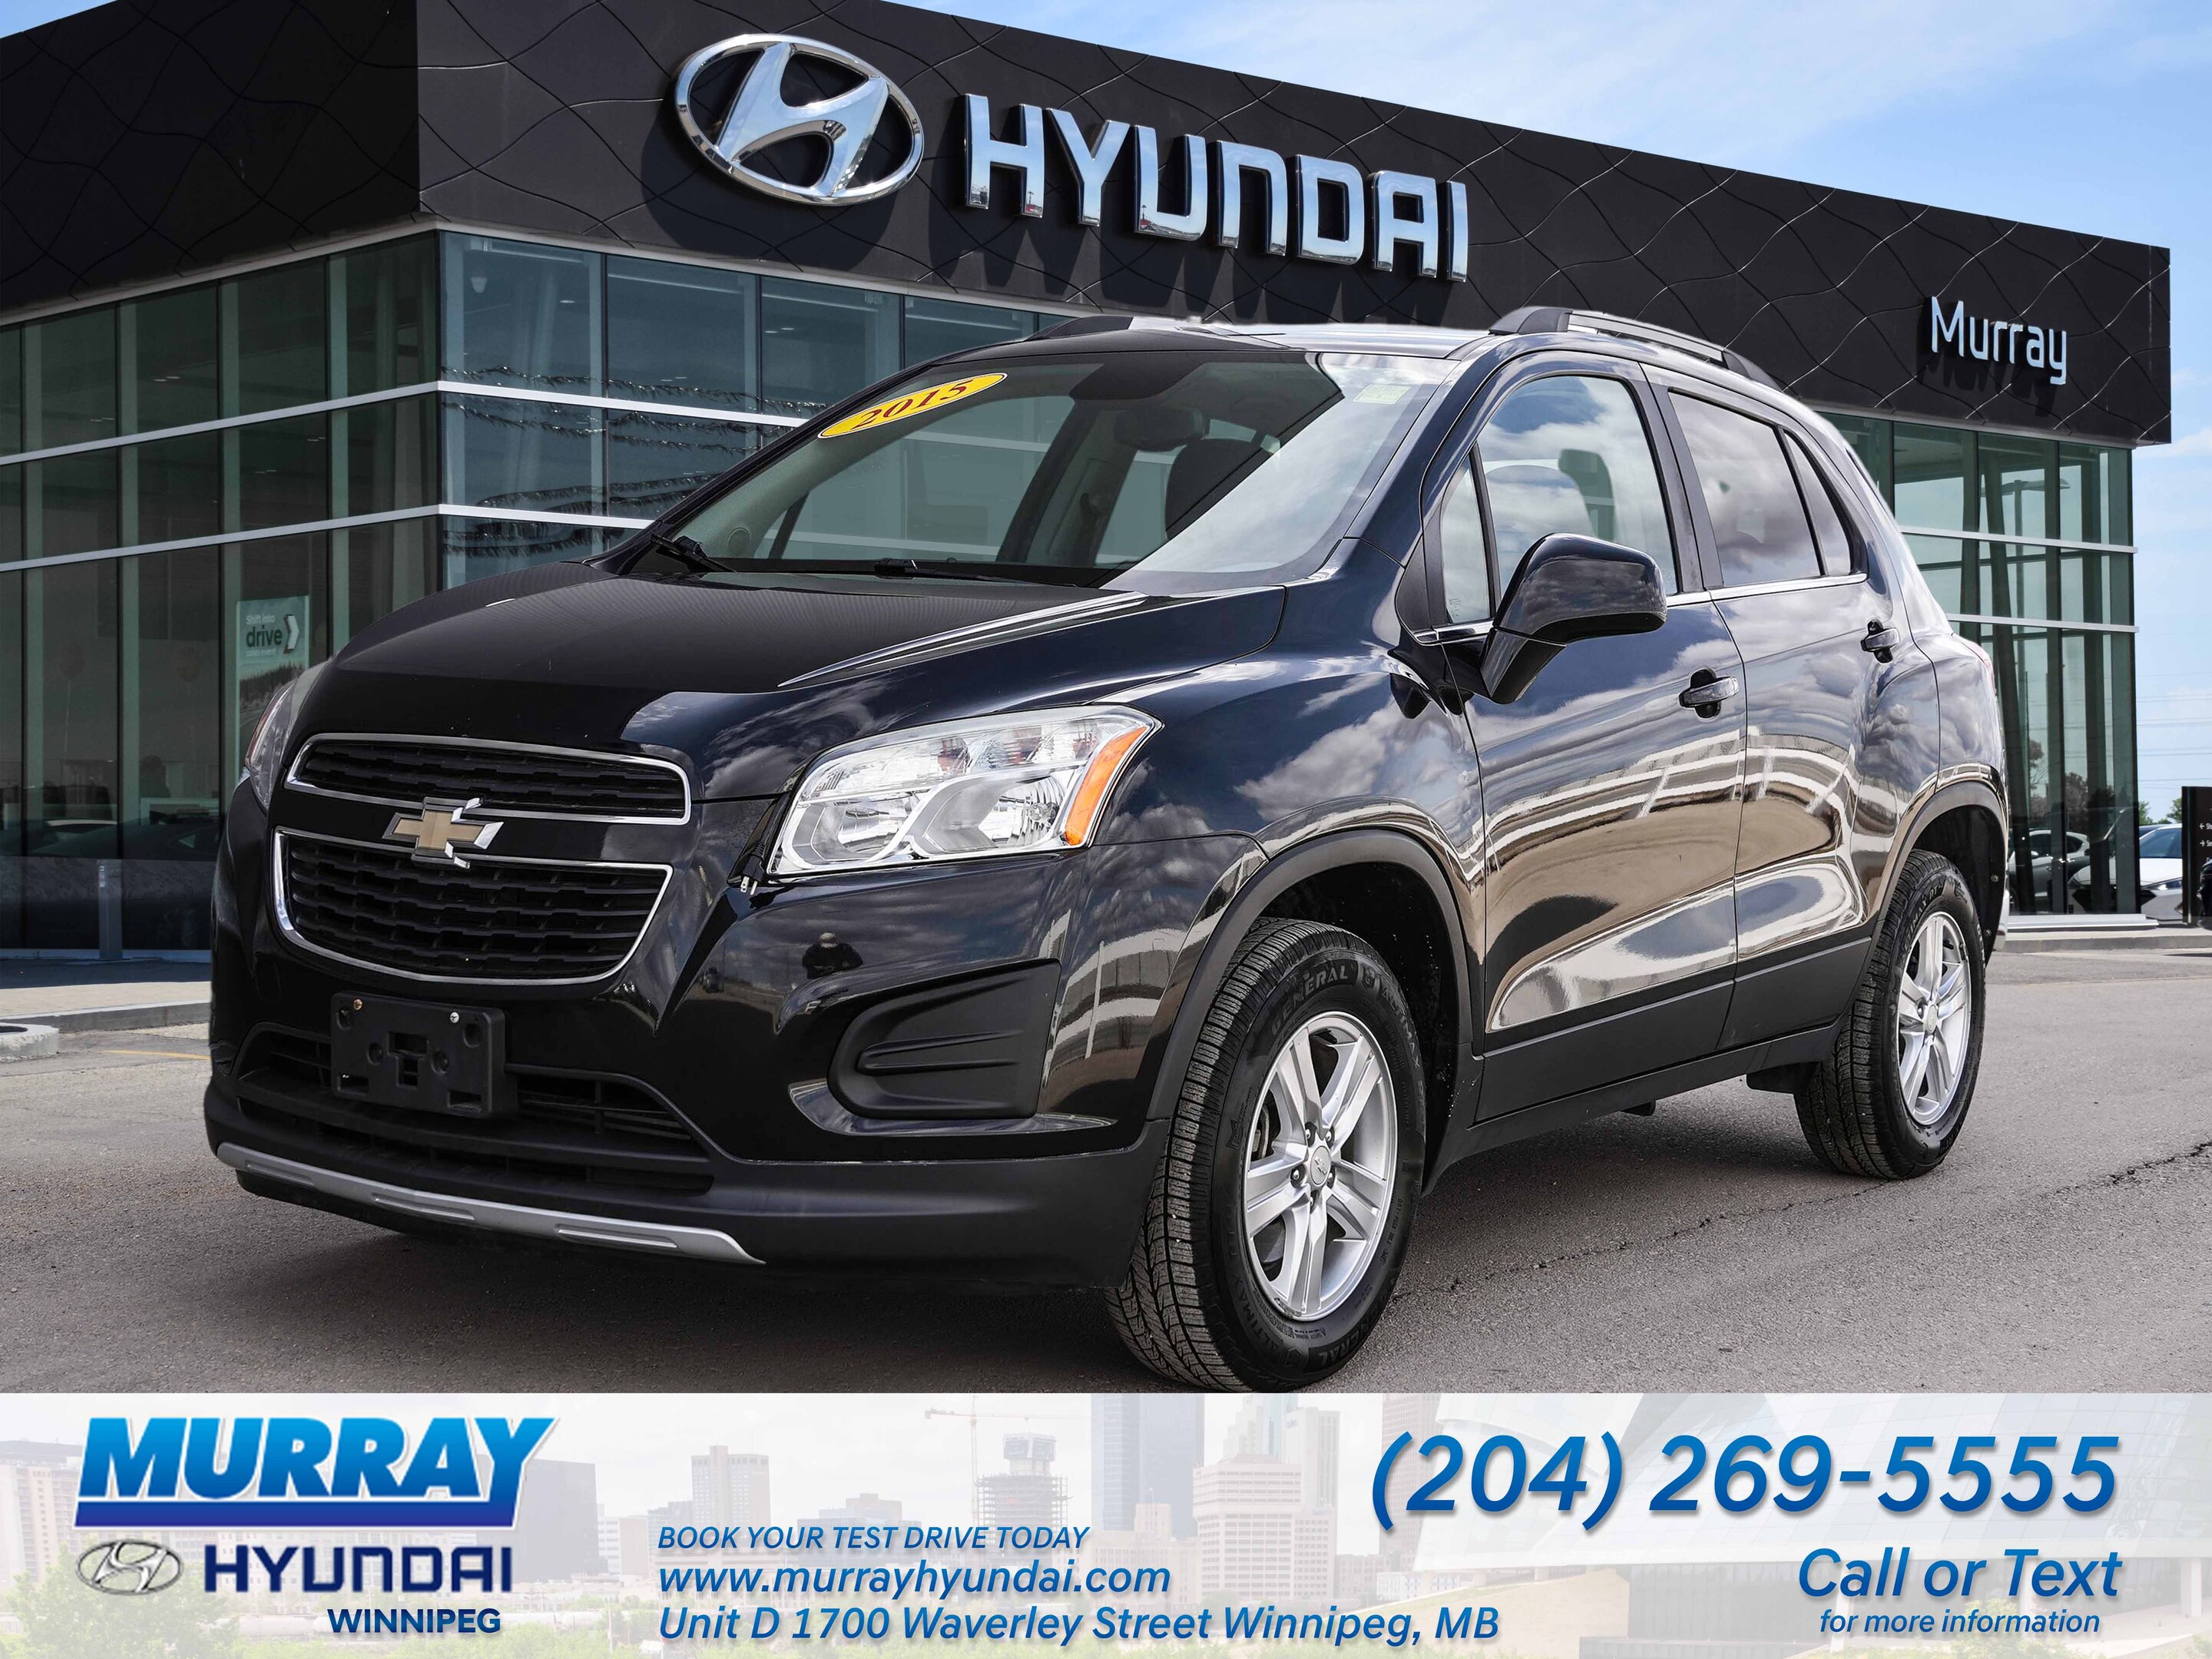 2015 Chevrolet Trax AWD LT w-1LT with Navigation and Bluetooth